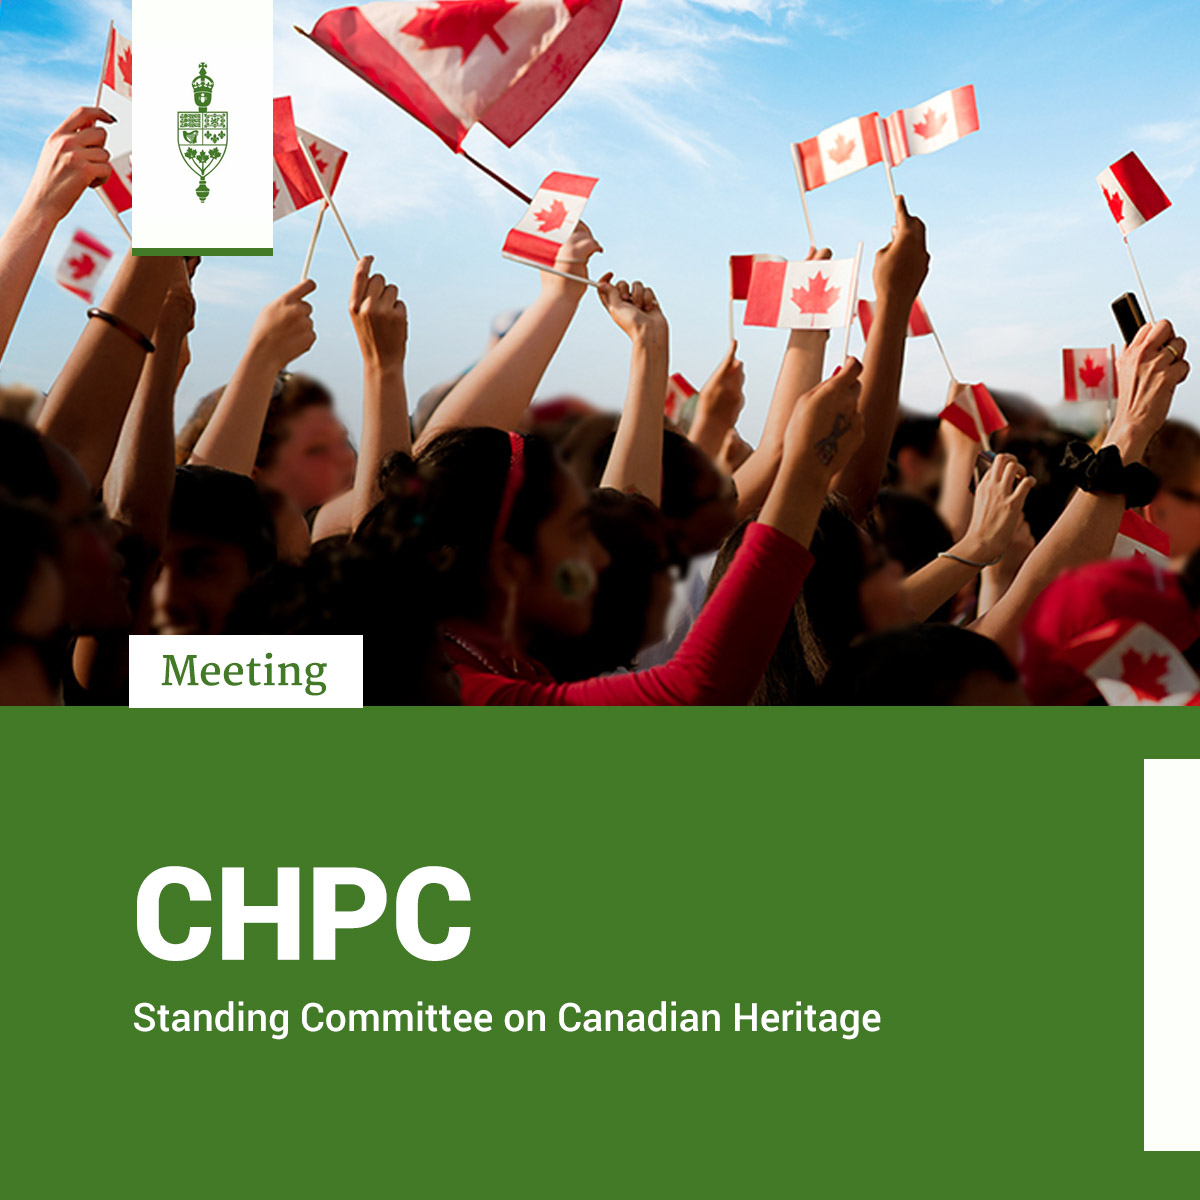 #CHPC 4:00 pm ET: Harms Caused by Online Viewing of Illegal Sexually Explicit Material / Committee Business ow.ly/JalA50Rbp3m #CdnPoli